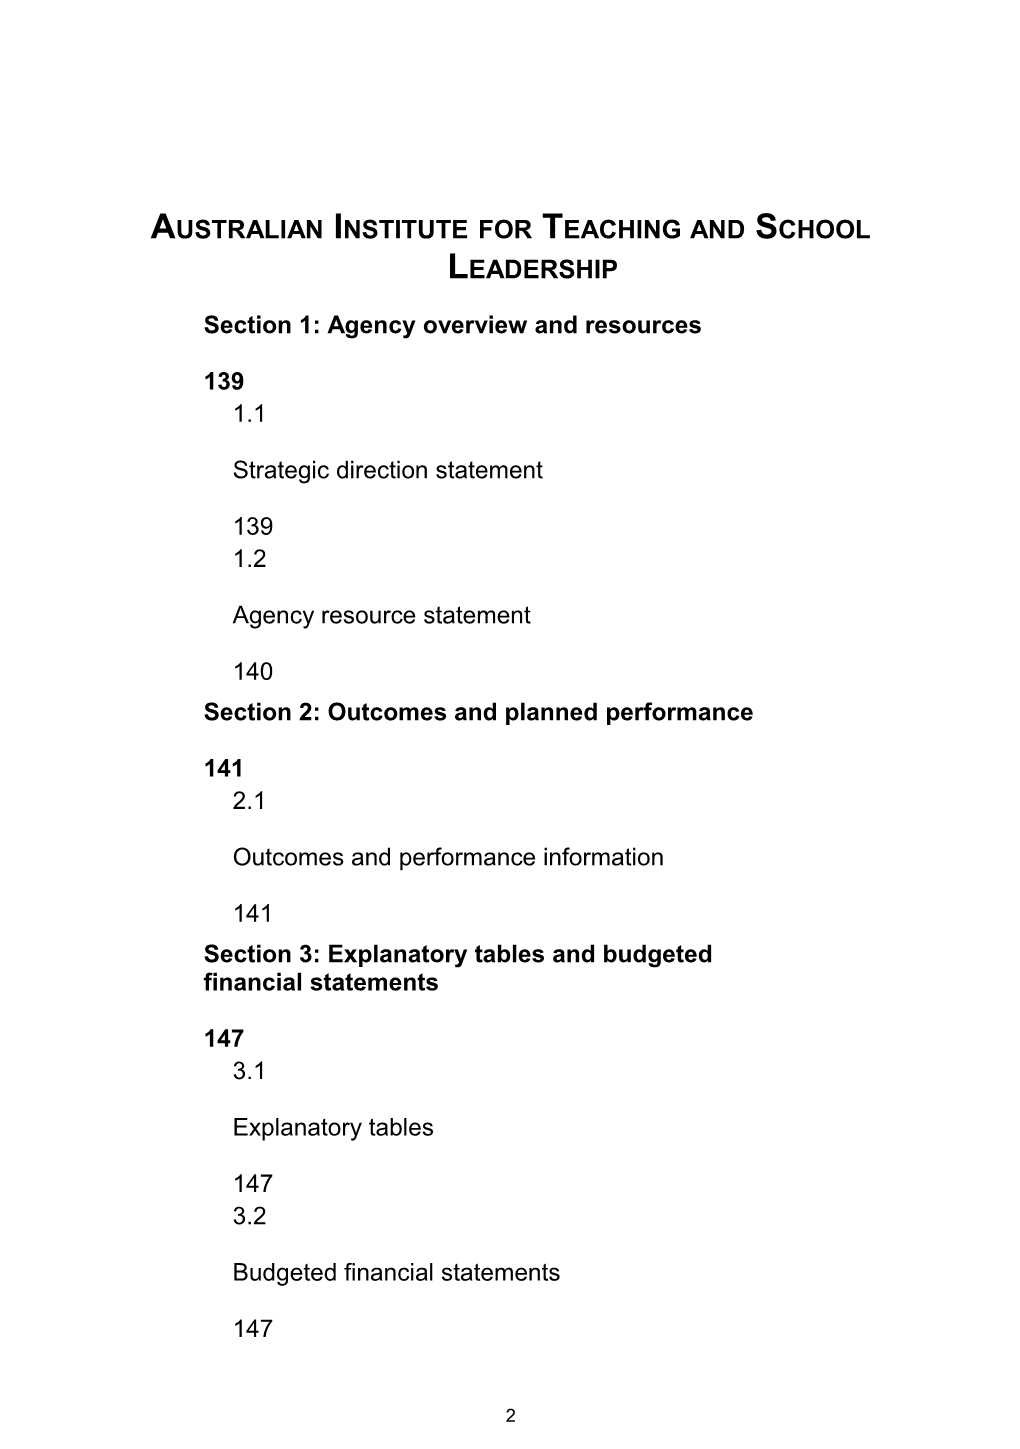 Australian Institute for Teaching and School Leadership Limited